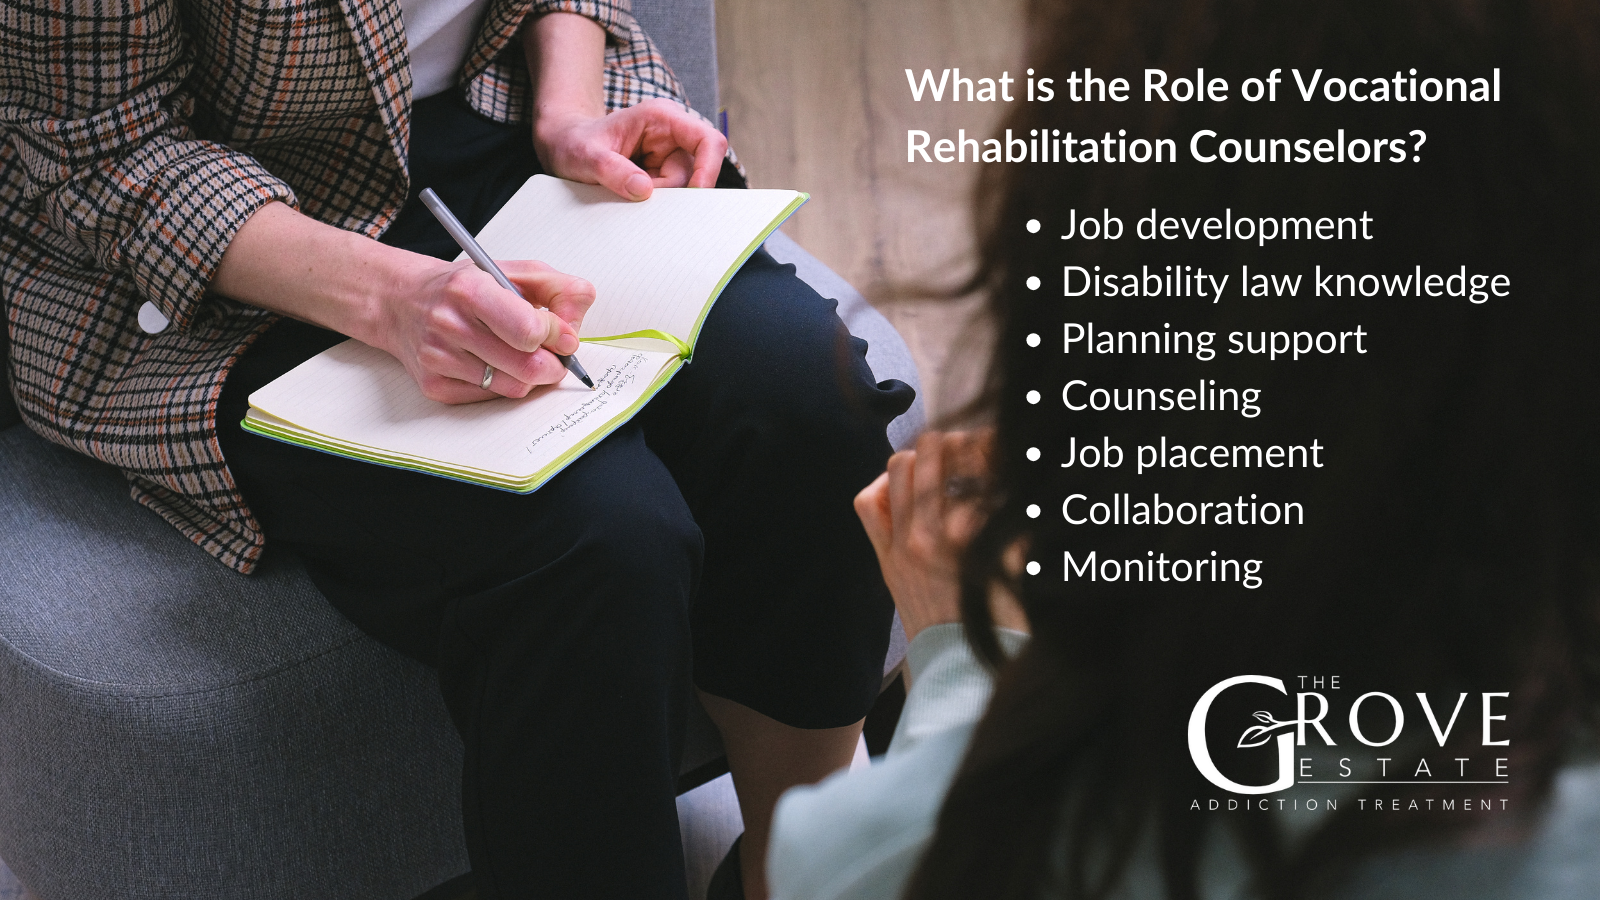 What is the Role of Vocational Rehabilitation Counselors